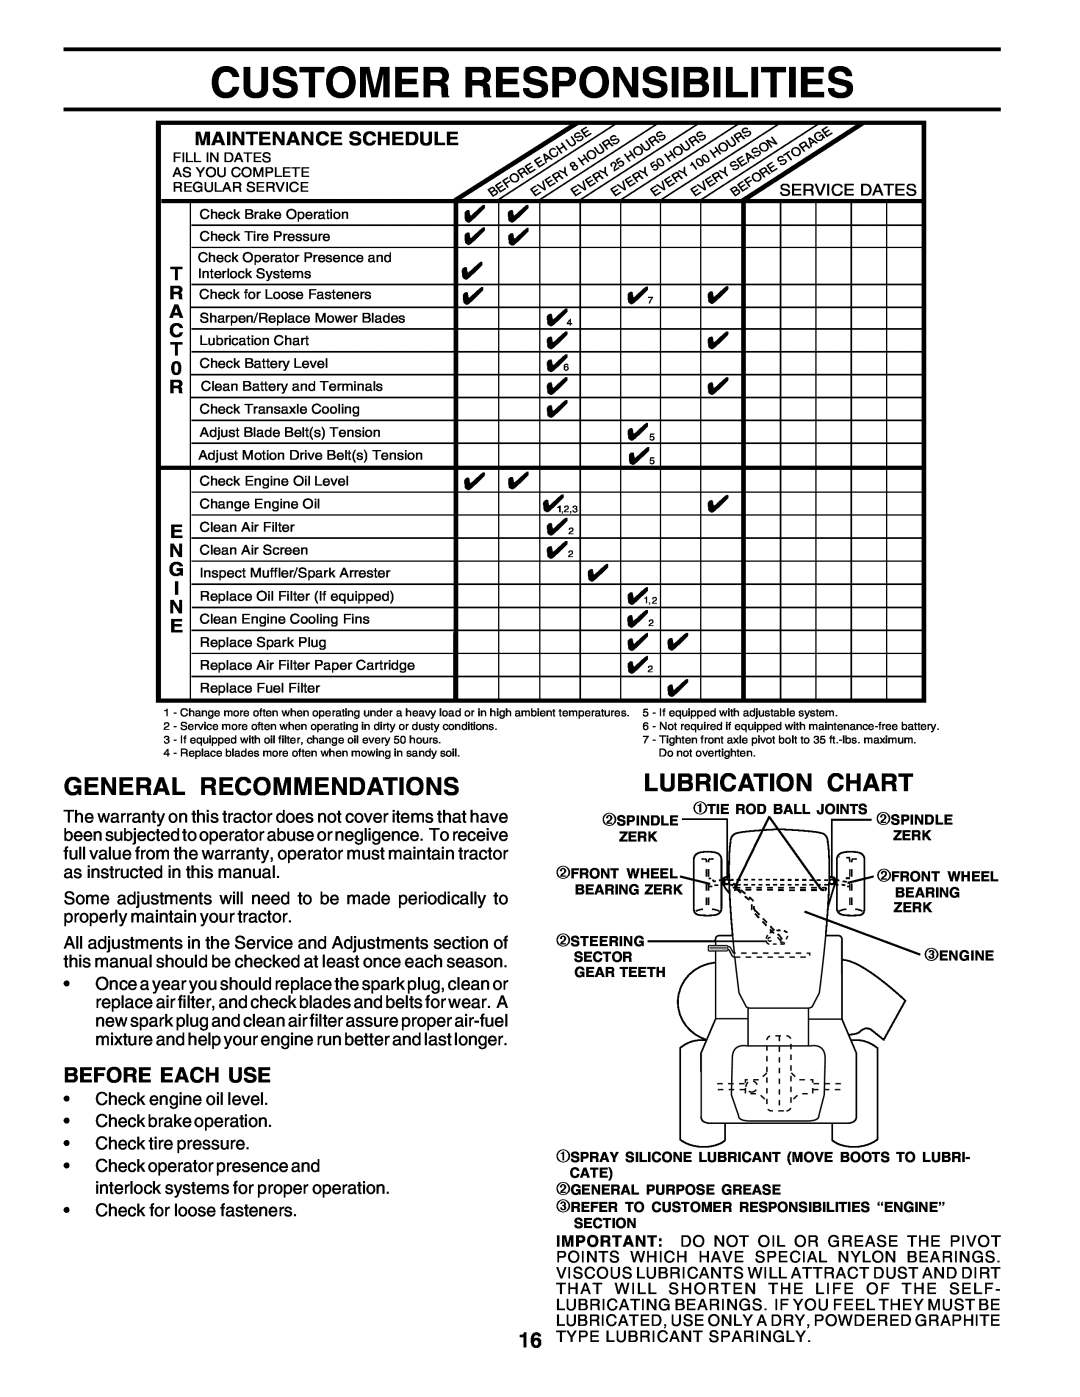 Poulan 176873 owner manual Customer Responsibilities, General Recommendations, Lubrication Chart ¡, Before Each Use 